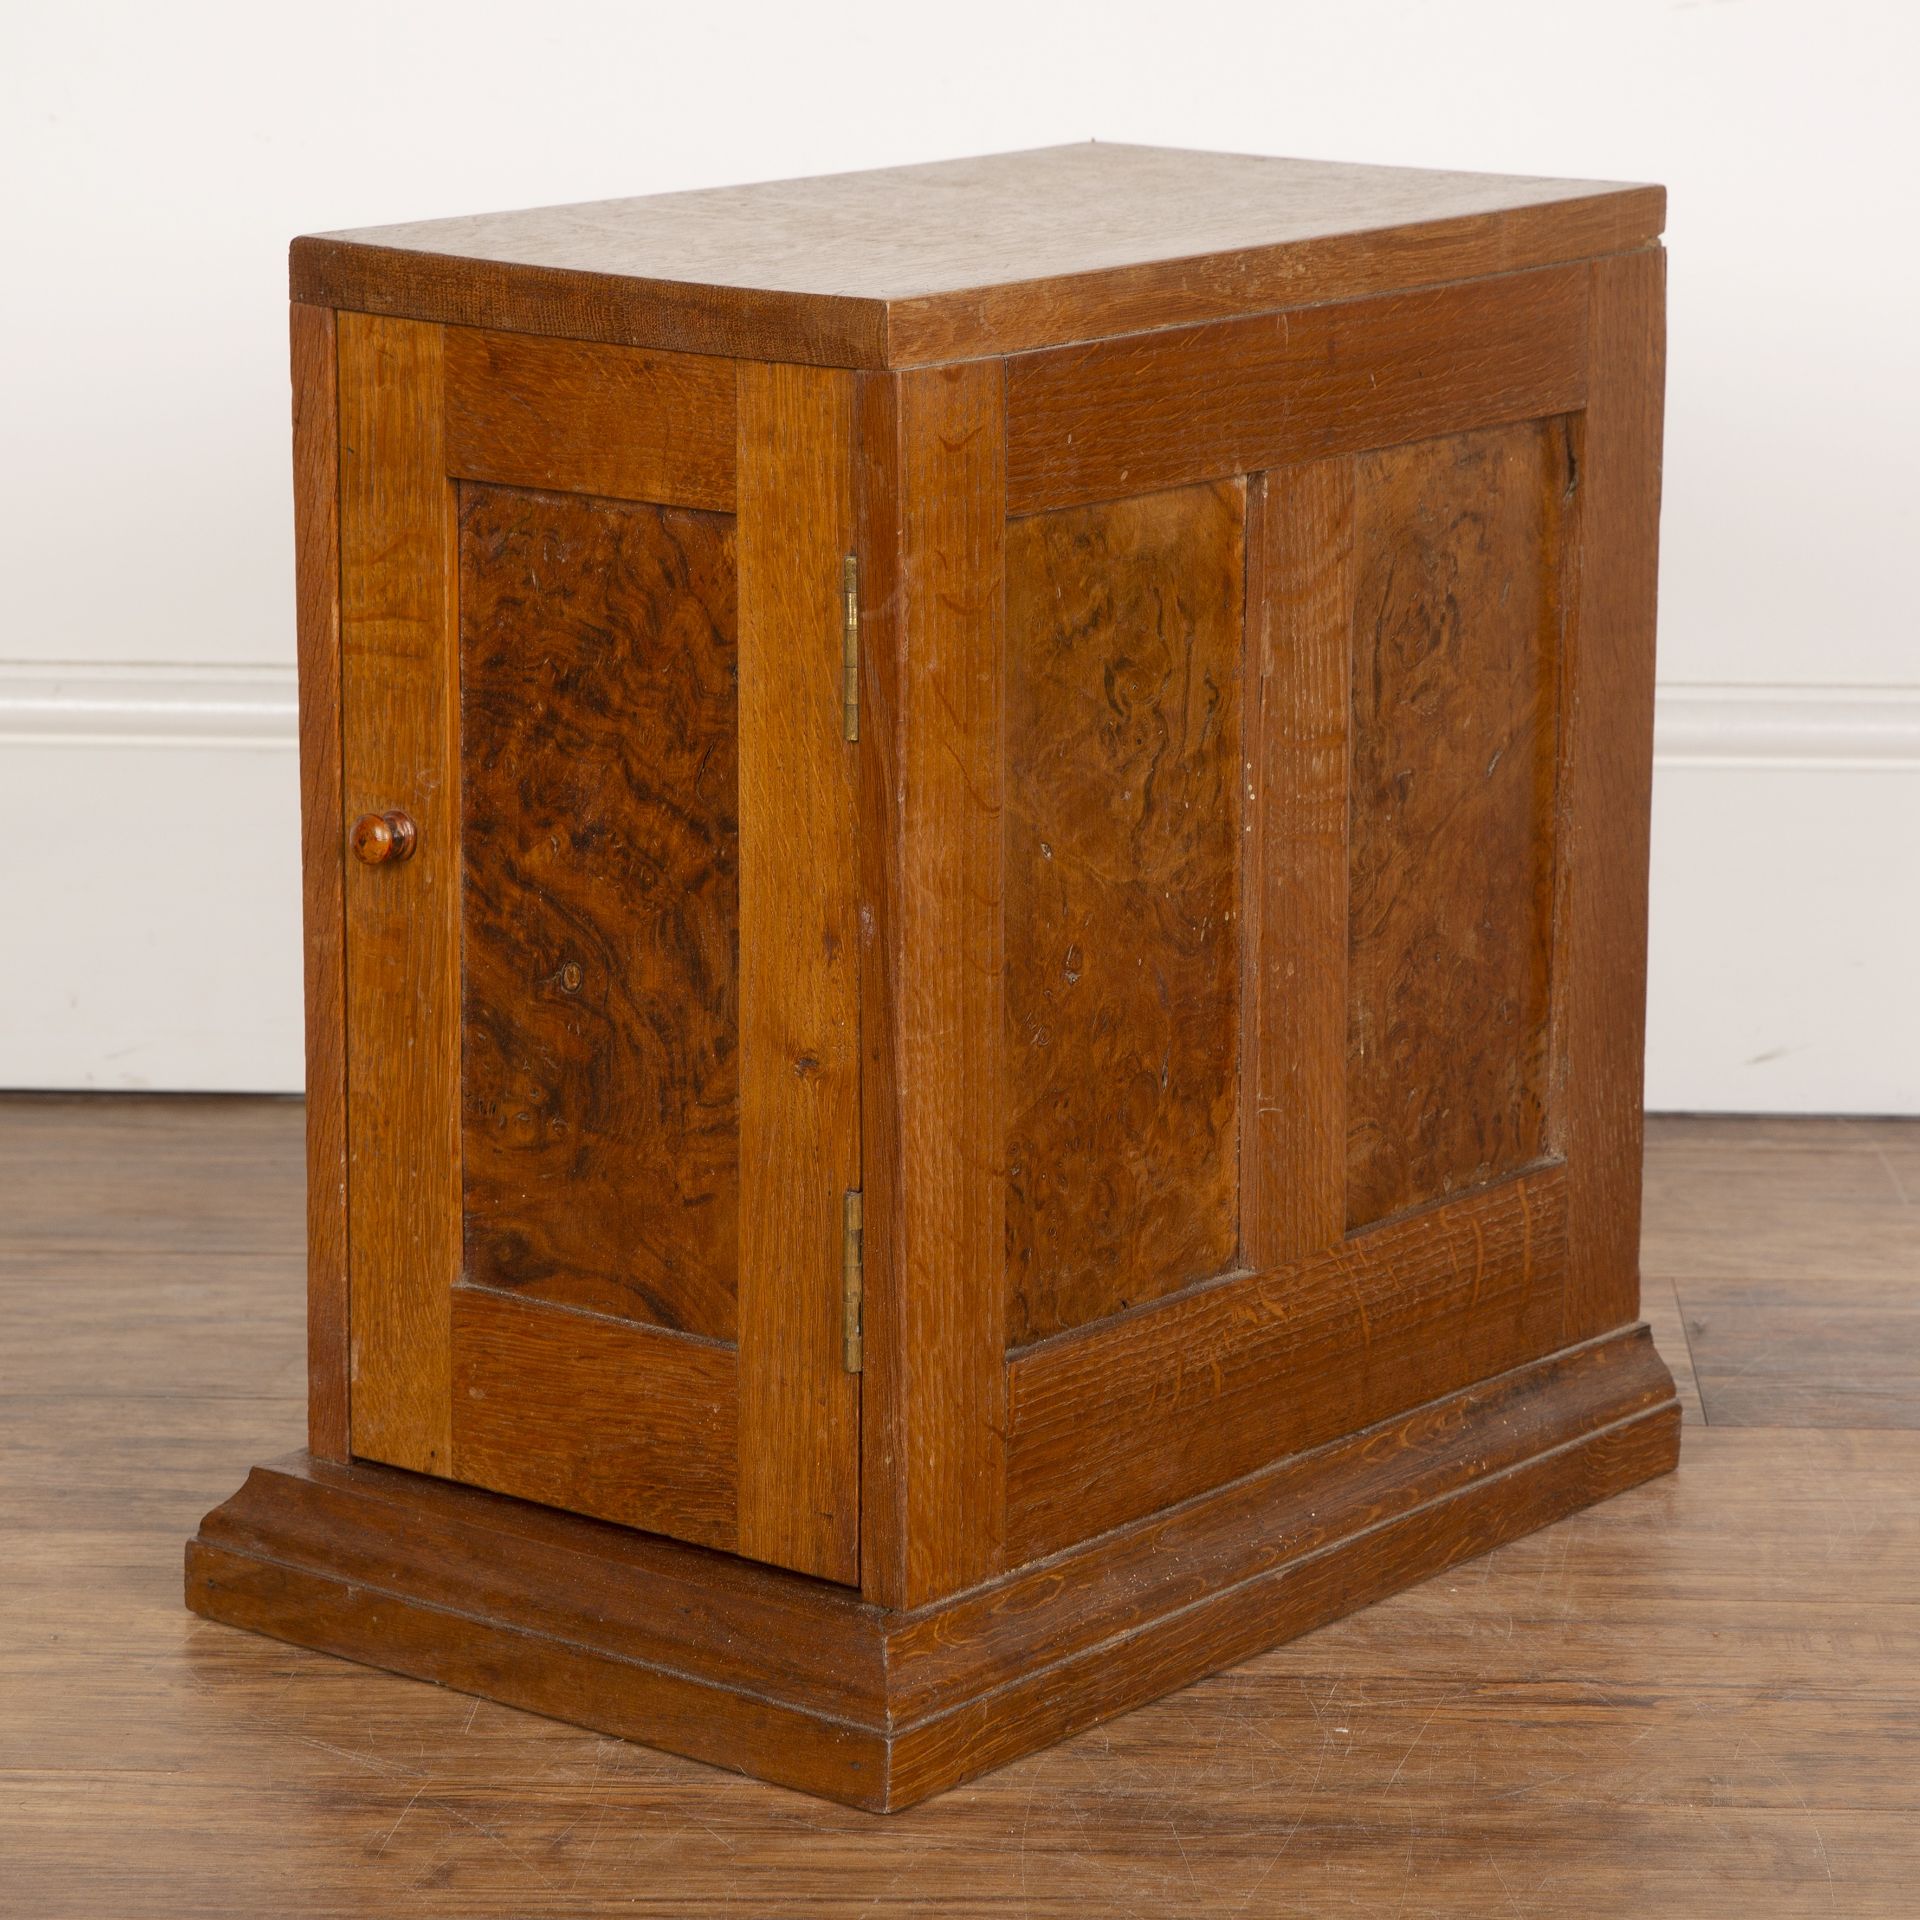 Cotswold School oak and burr walnut tabletop cupboard, with panelled doors and sides, on plinth - Image 3 of 5